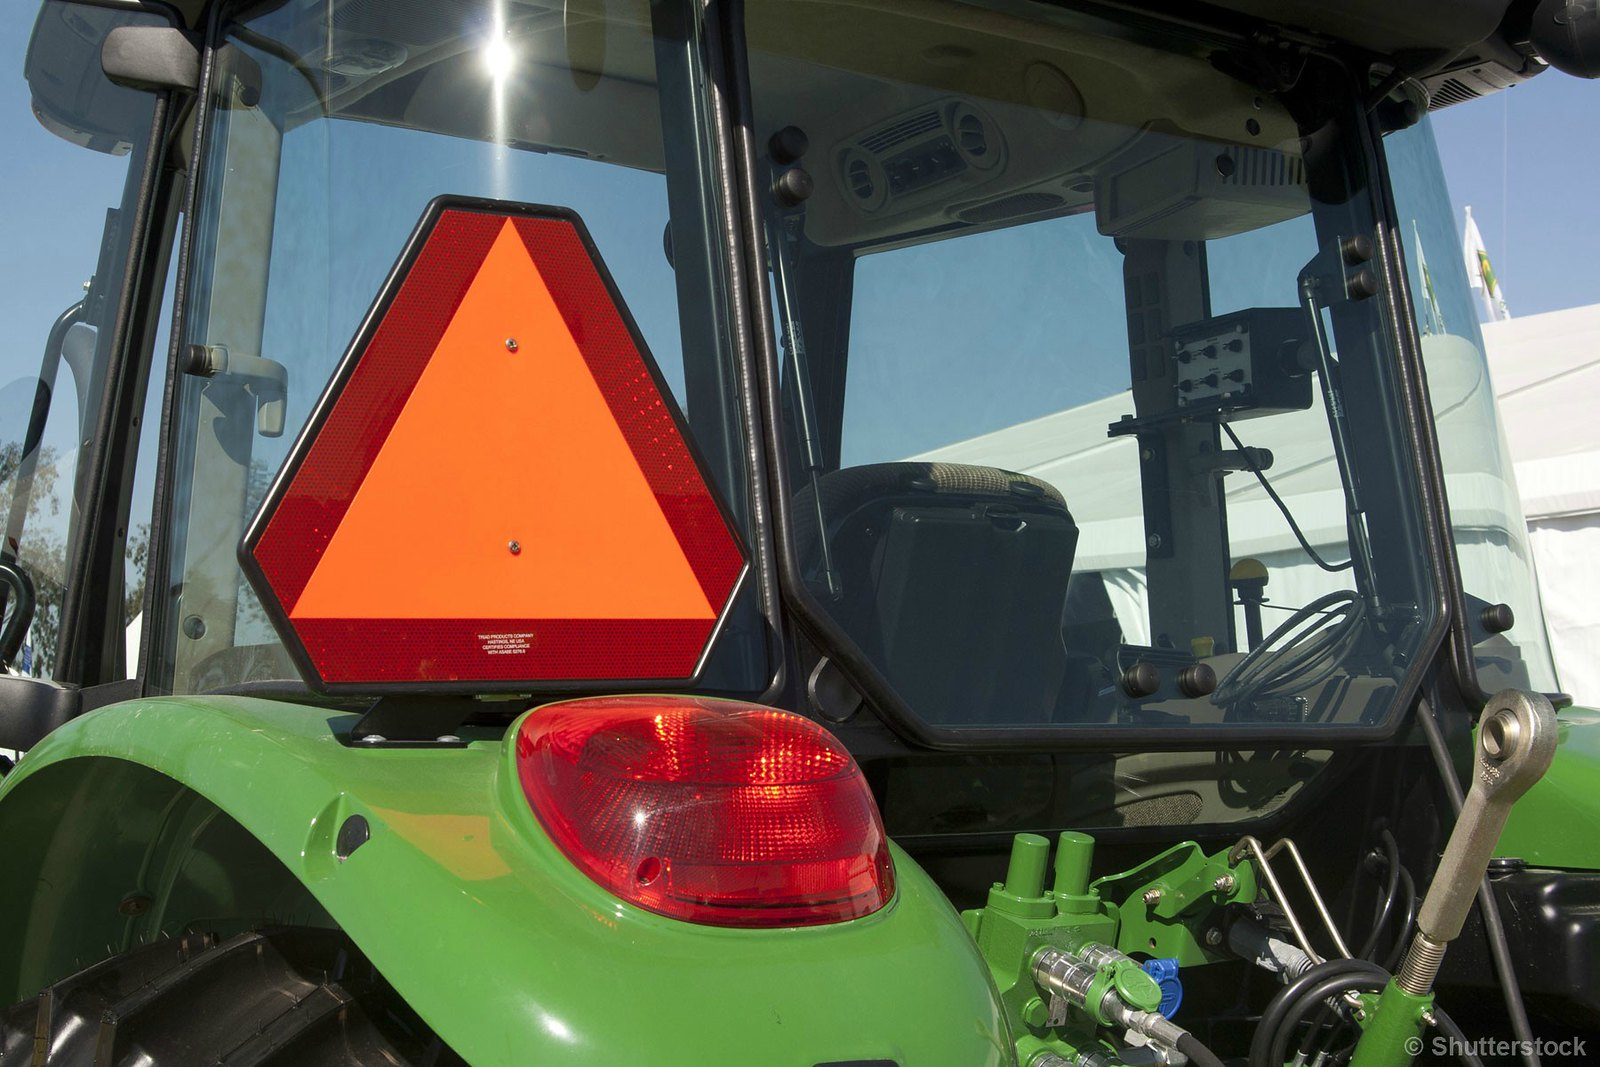 Farm Safety Is Especially Important In The Spring